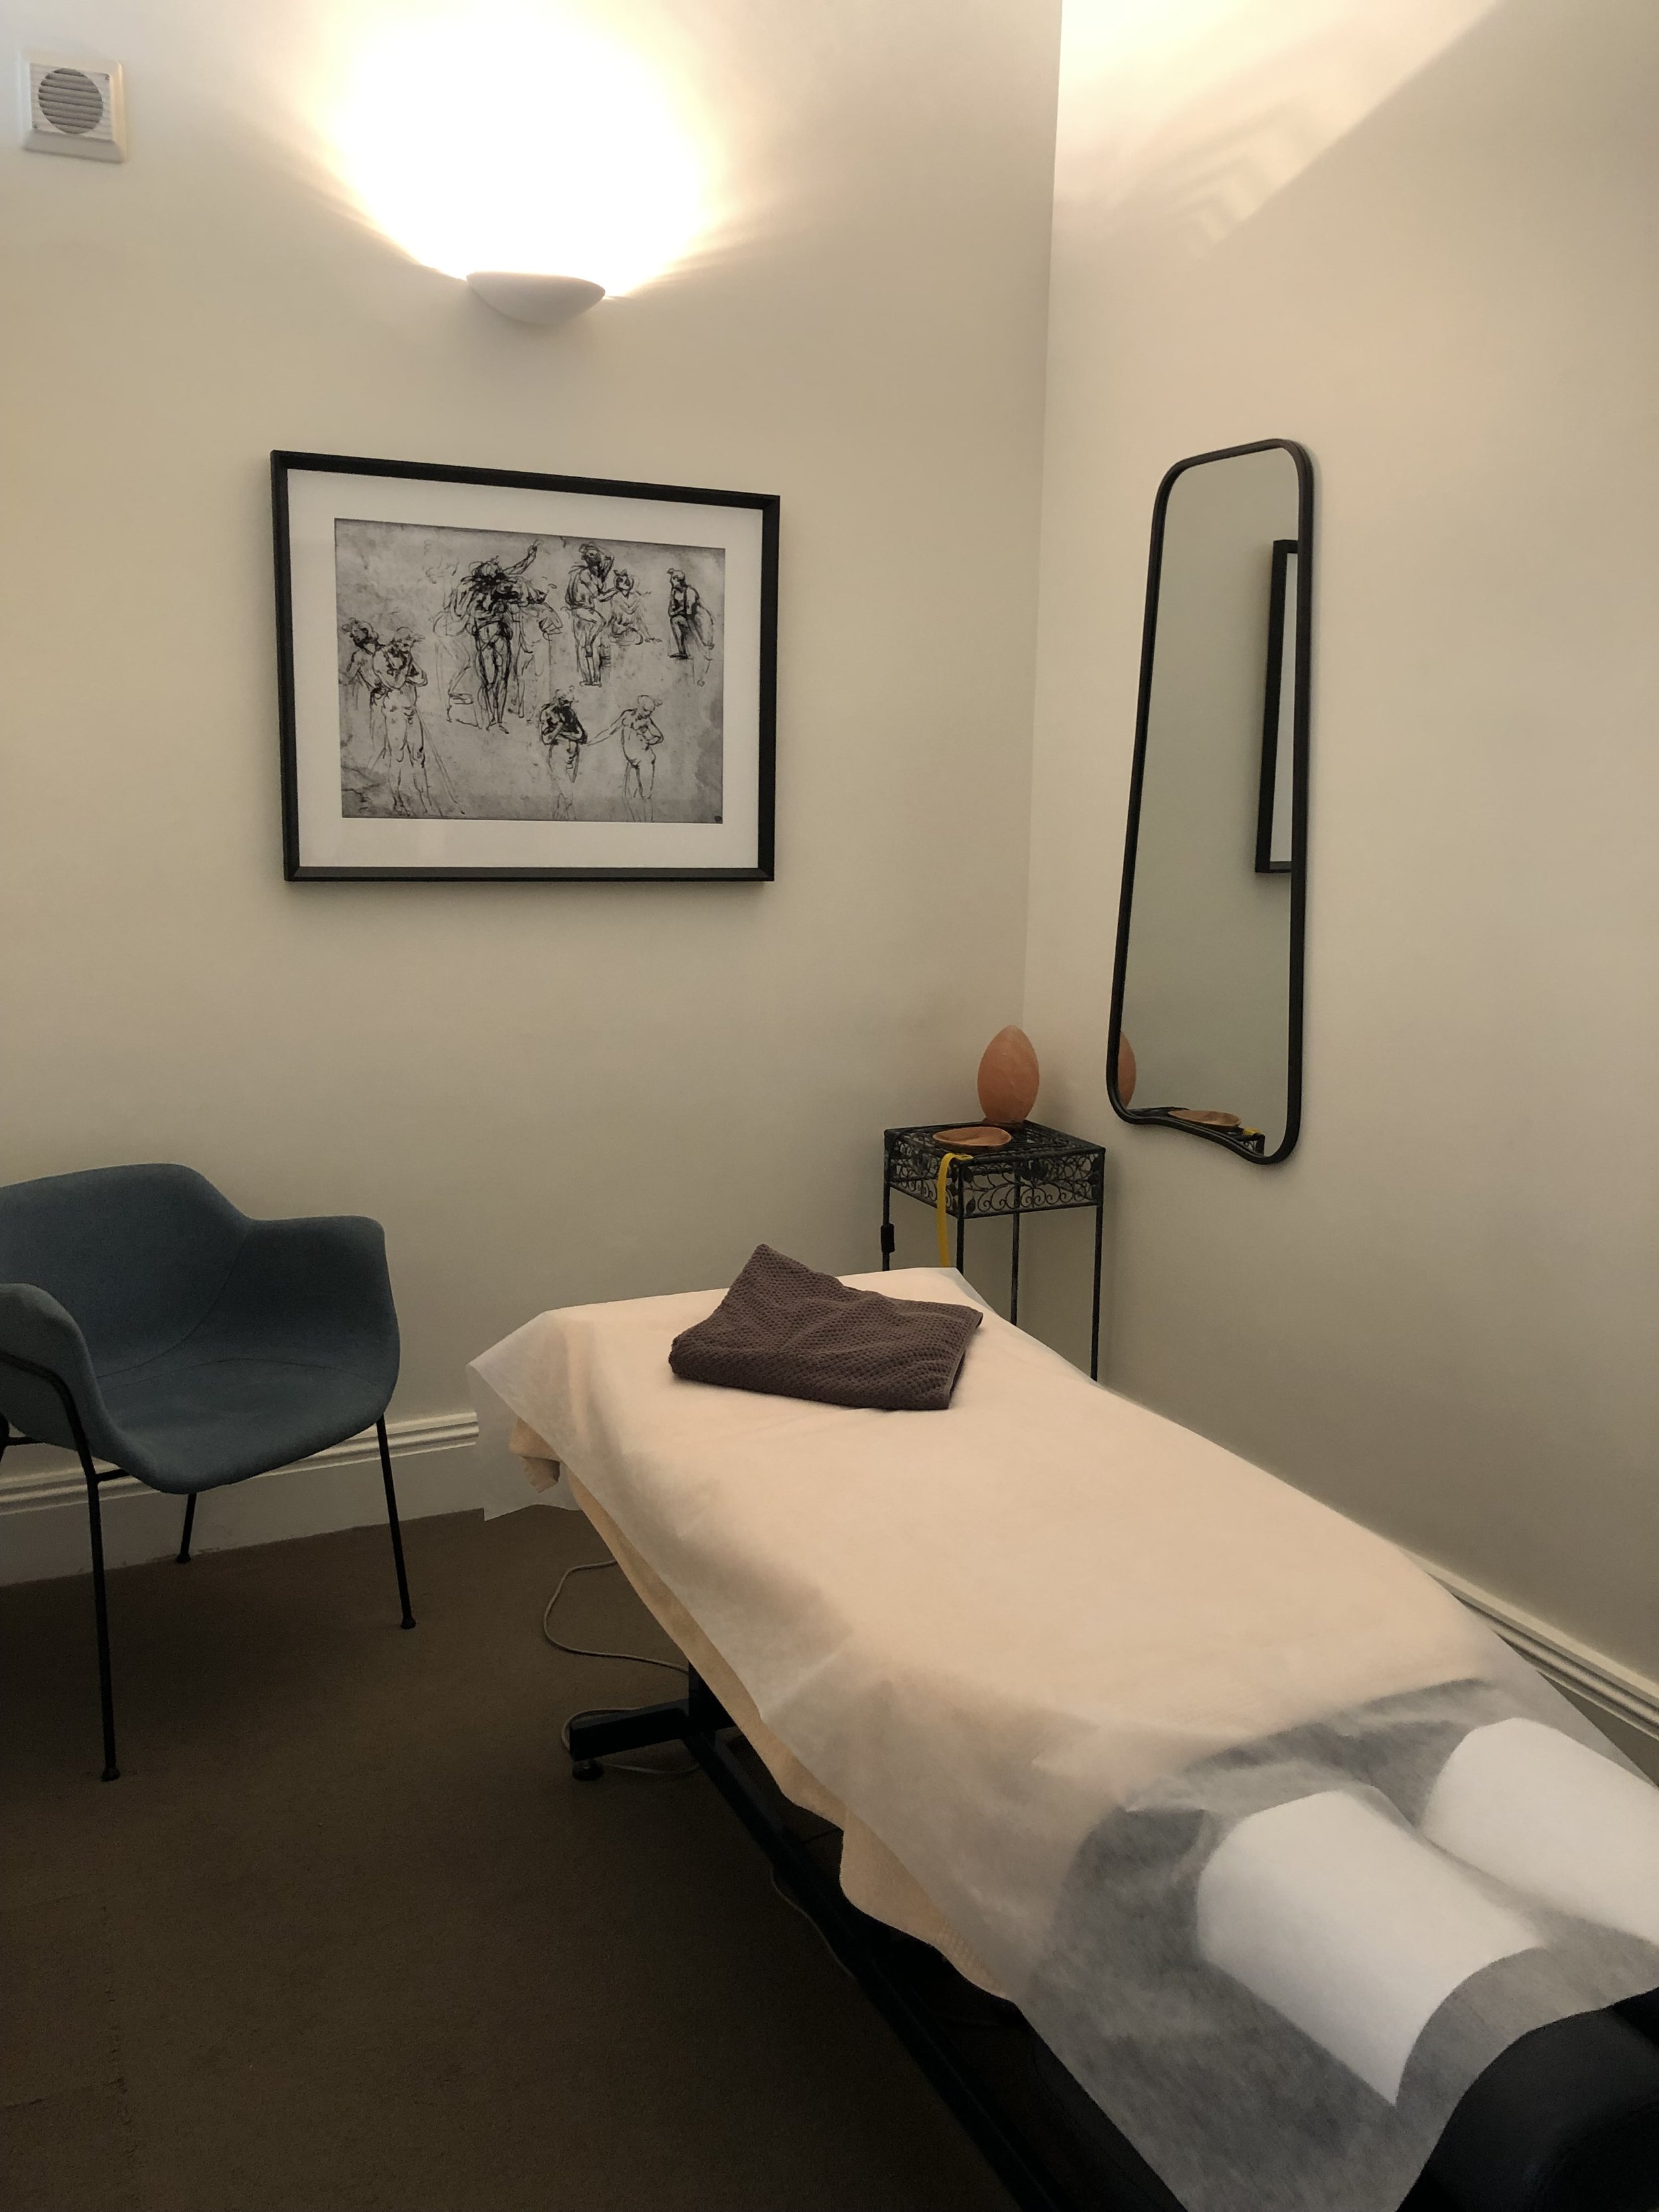 A massage table in one of the treatment rooms at Jowett and Moulton Chiro Melbourne